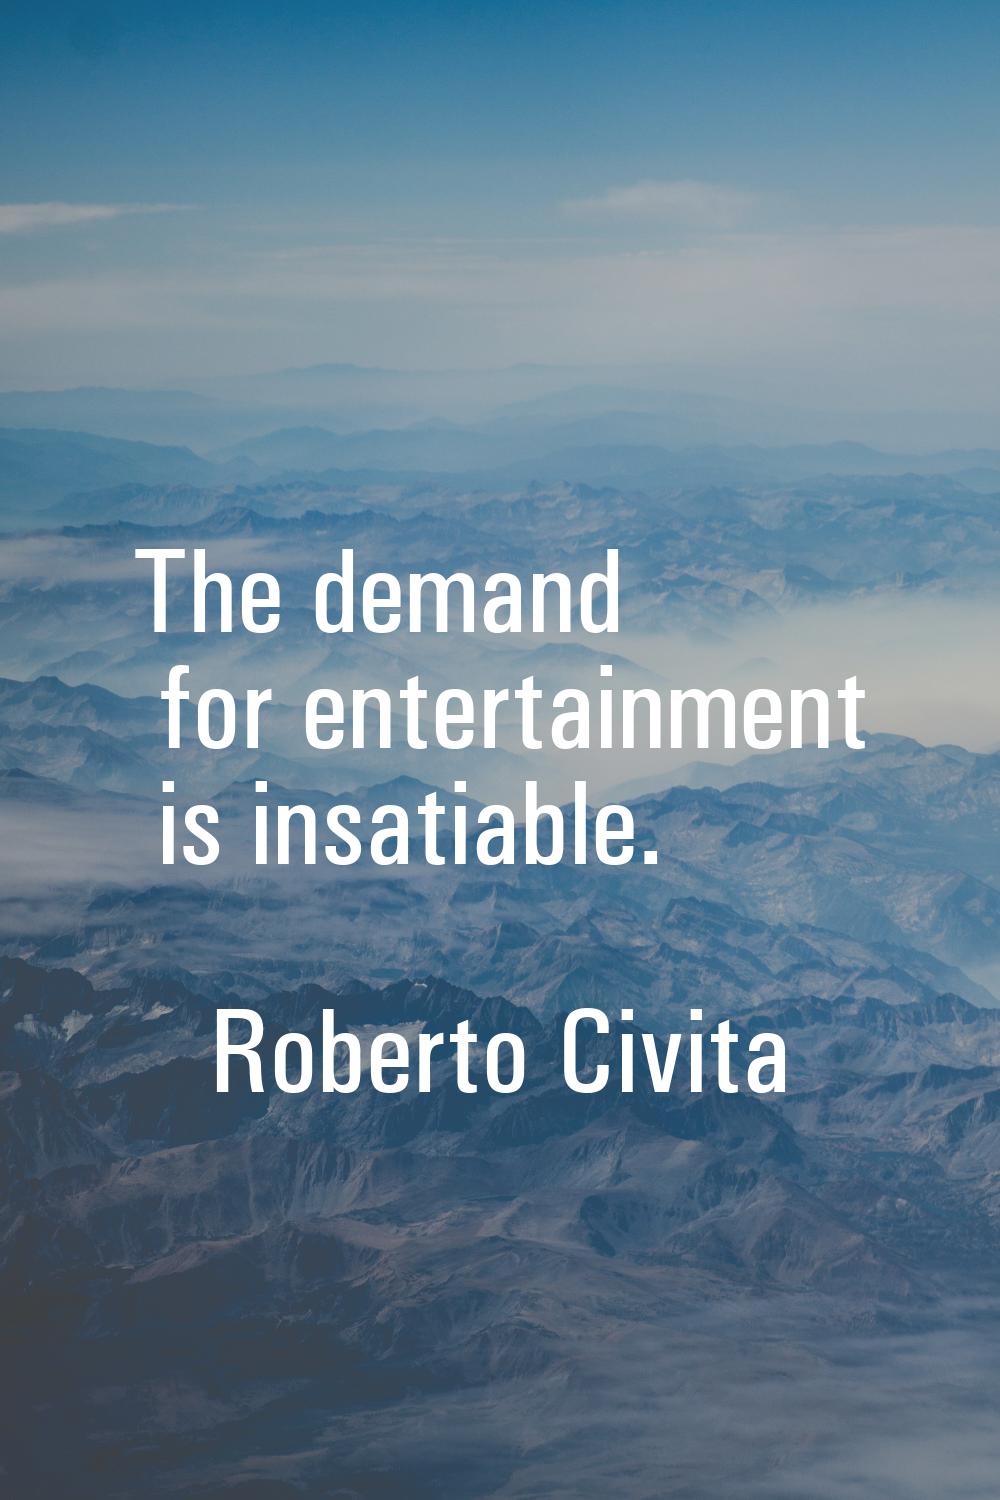 The demand for entertainment is insatiable.